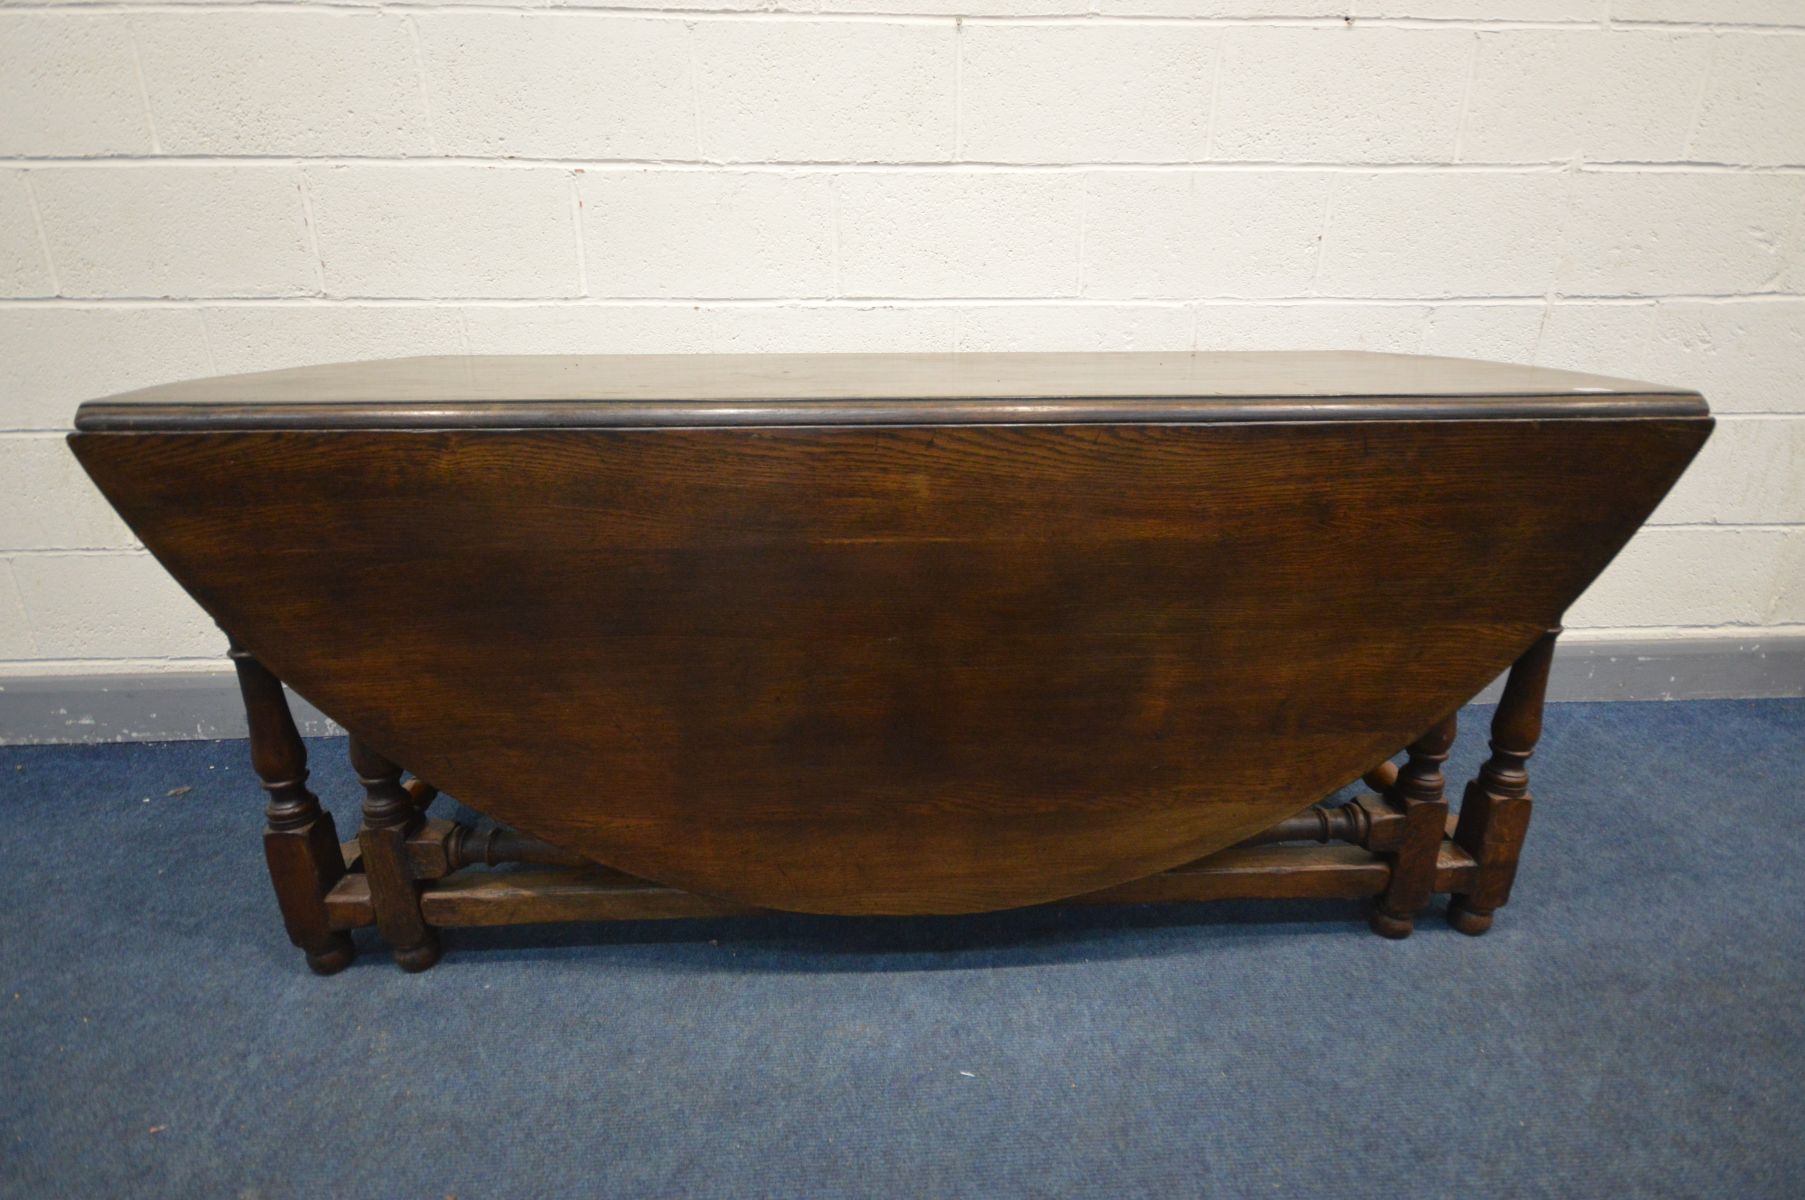 A LARGE REPRODUCTION GEORGIAN STYLE OAK GATE LEG TABLE, the drop leaves each with double legs, - Image 5 of 5